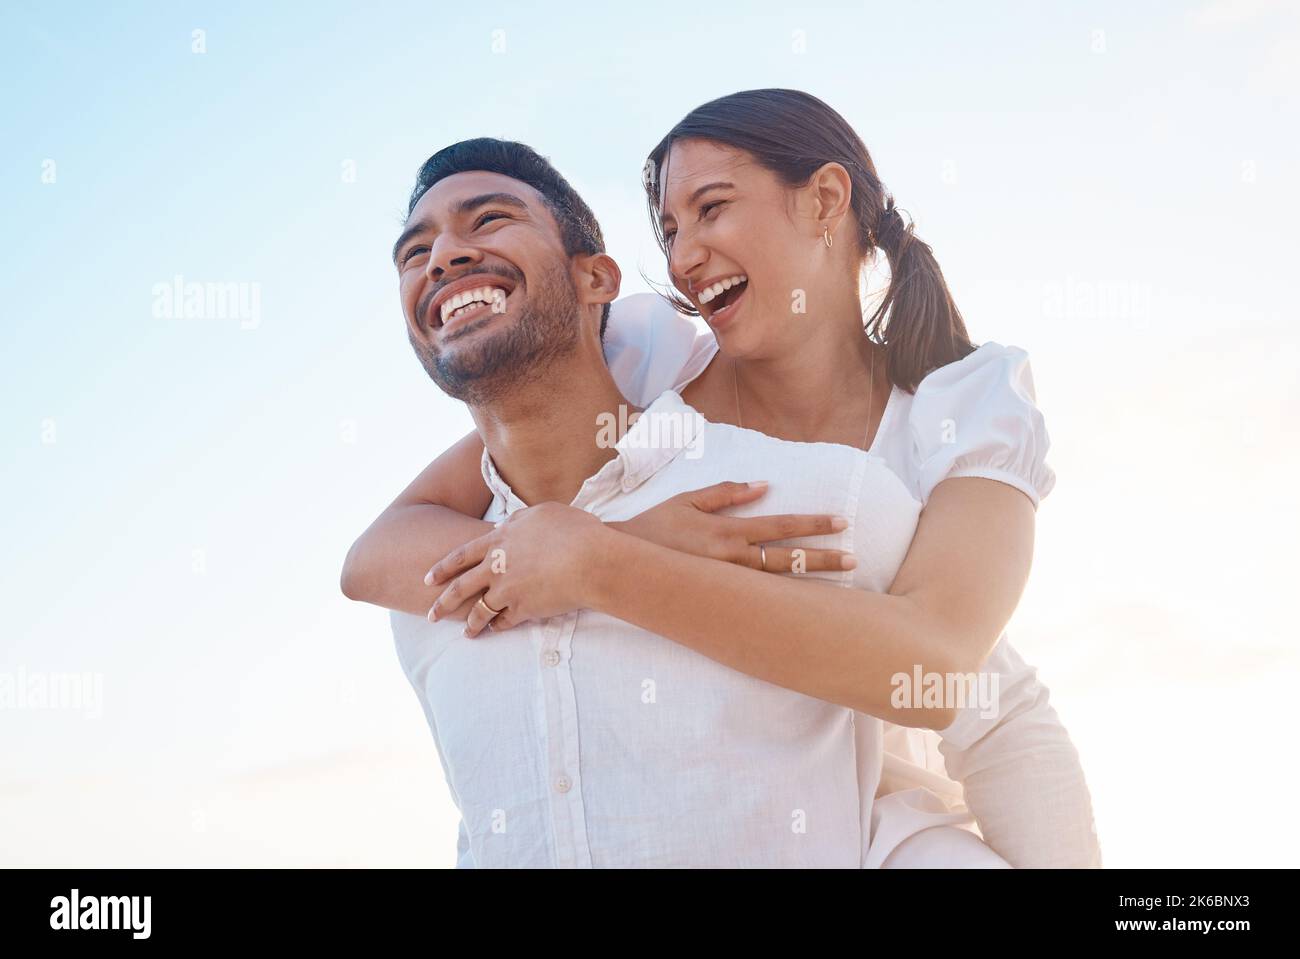 A young couple looking joyful and energized while dpending time together  Stock Photo - Alamy